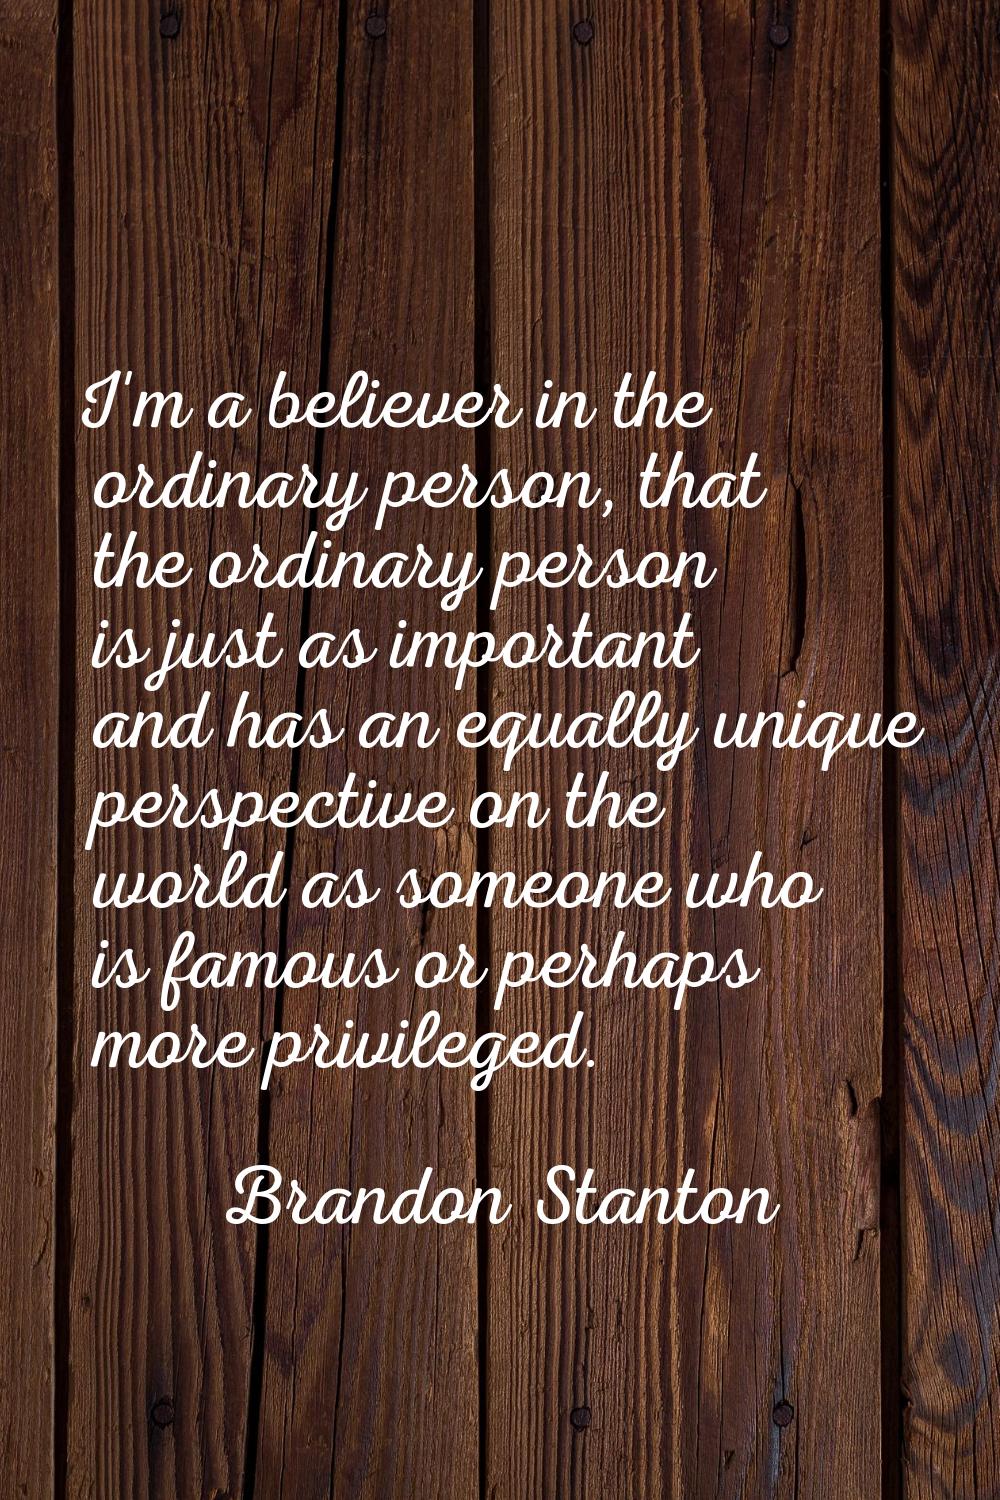 I'm a believer in the ordinary person, that the ordinary person is just as important and has an equ